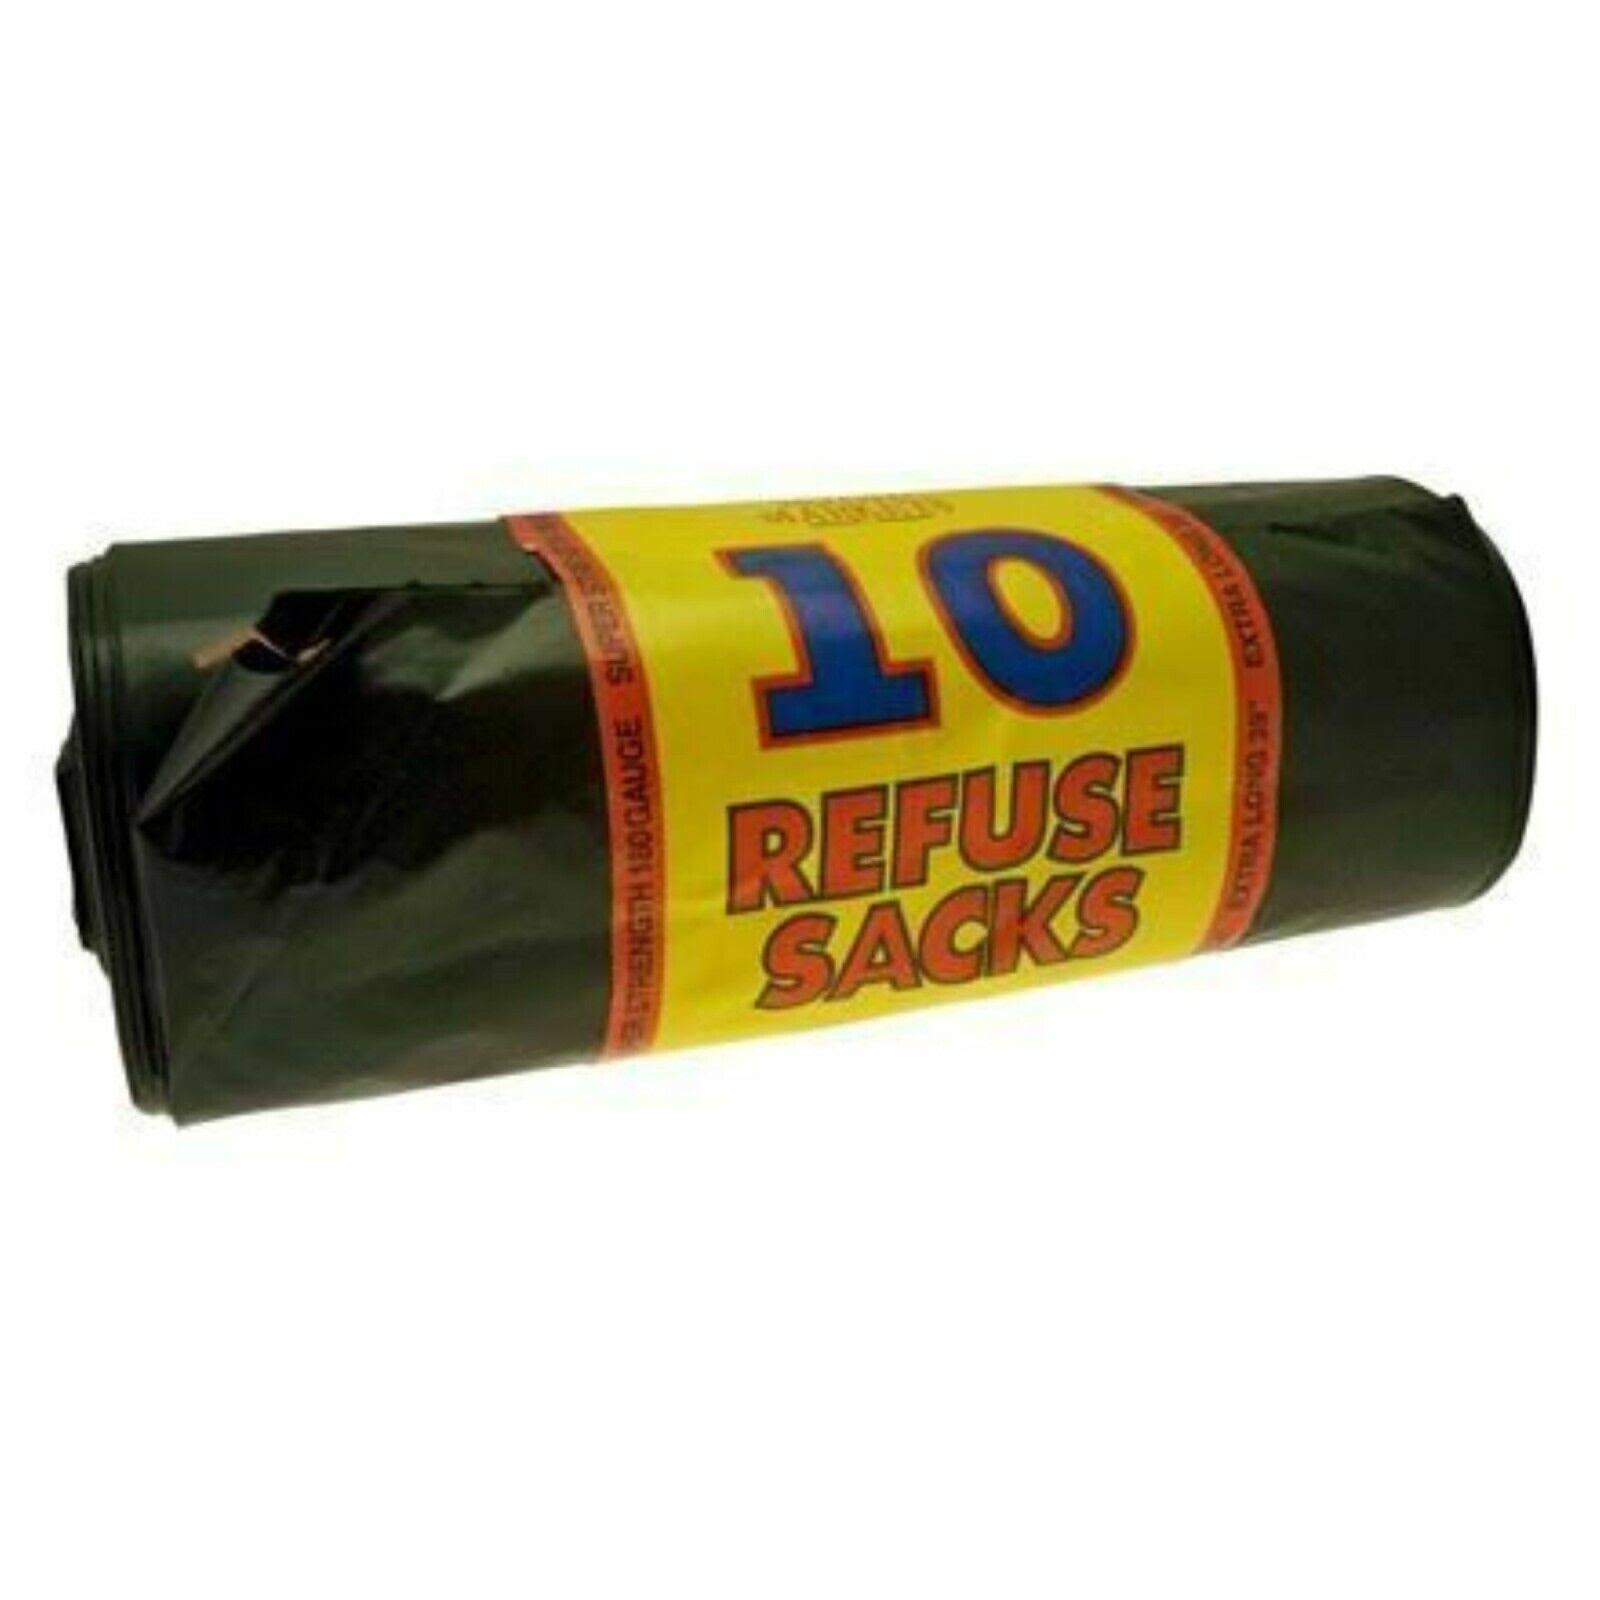 Royal Markets Refuse Sacks with Tie - Pack of 10